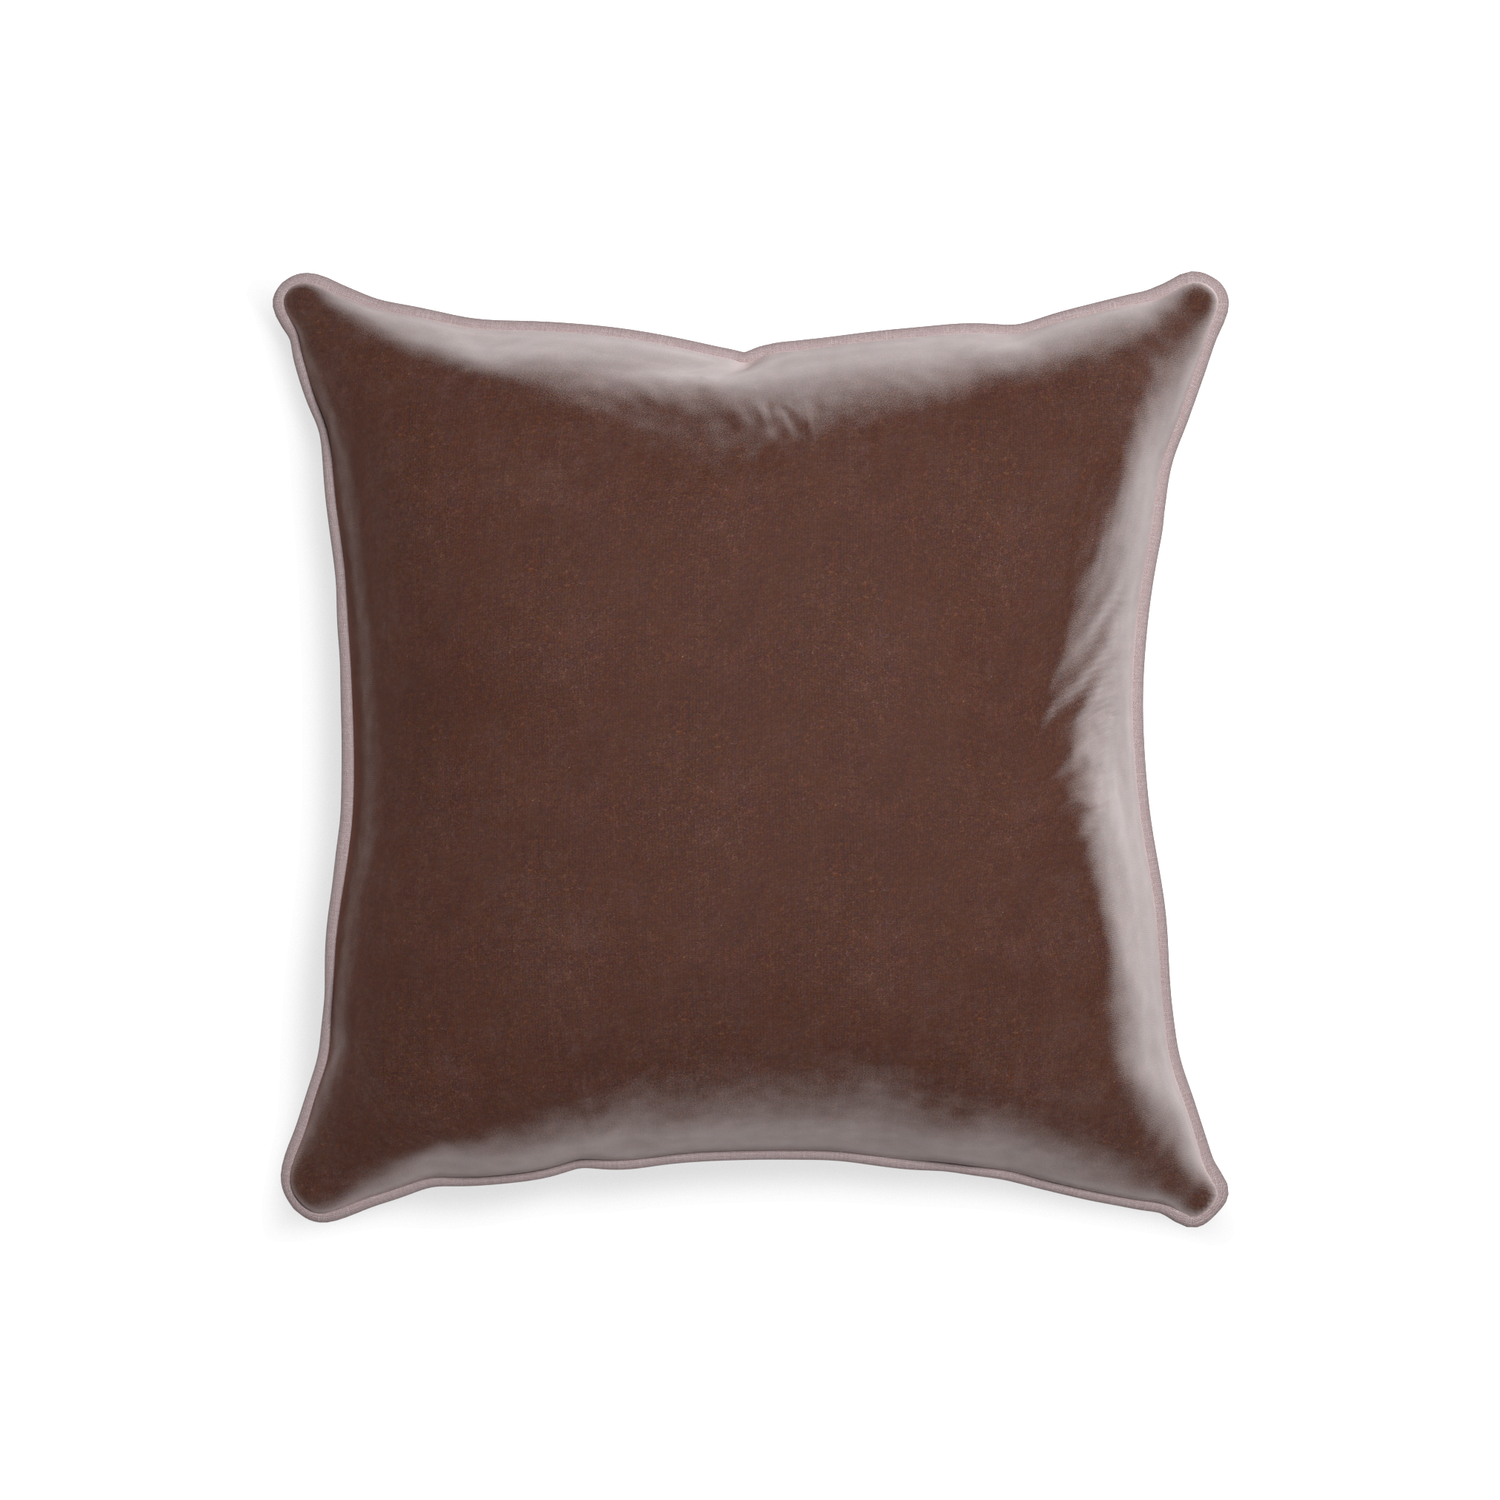 20-square walnut velvet custom brownpillow with orchid piping on white background